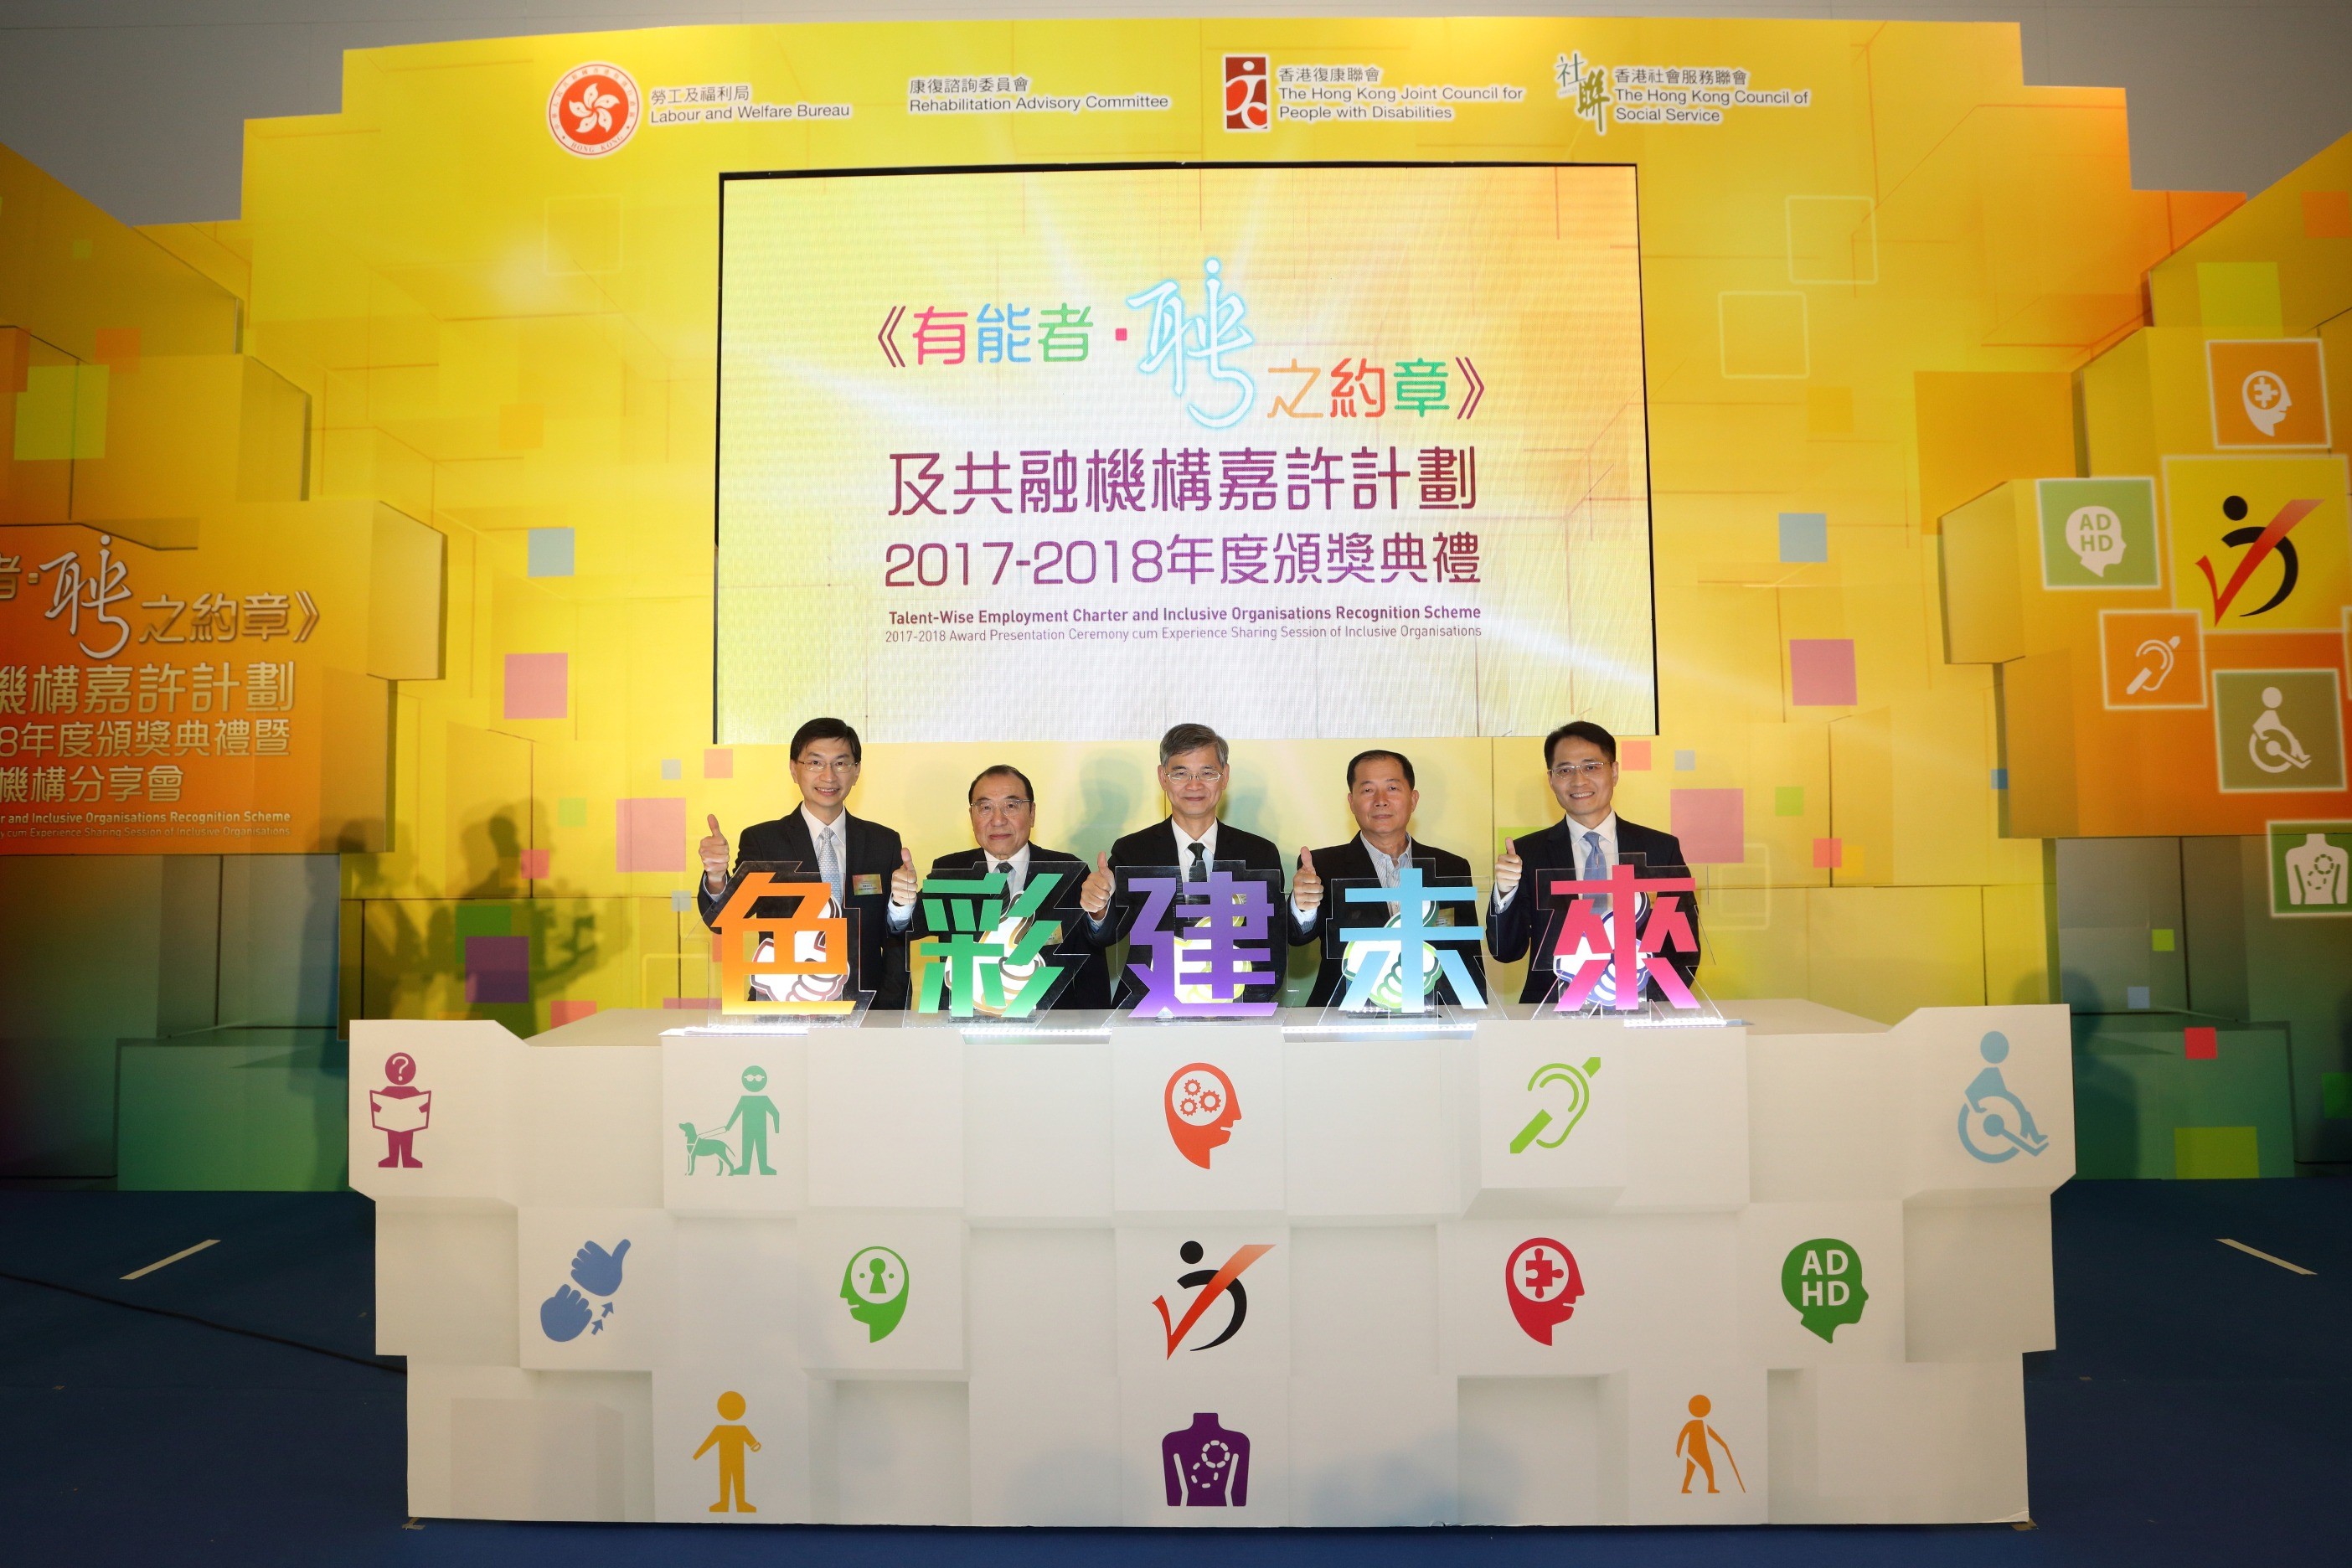 The Secretary for Labour and Welfare, Dr Law Chi-kwong, GBS, JP (Centre); Chairman of the Rehabilitation Advisory Committee (RAC), Mr Anthony Yeung Kwok-ki, BBS, JP (2nd from left); Chairman of the Hong Kong Joint Council for People with Disabilities, Mr Benny Cheung Wai-leung (2nd from right); Chief Executive of the Hong Kong Council of Social Service, Mr Chua Hoi-wai (1st from left); and Chairperson of the RAC Sub-committee on Employment, Mr Billy Man (1st from right), officiated the kick-off ceremony for promoting the equal employment opportunities of PWDs.